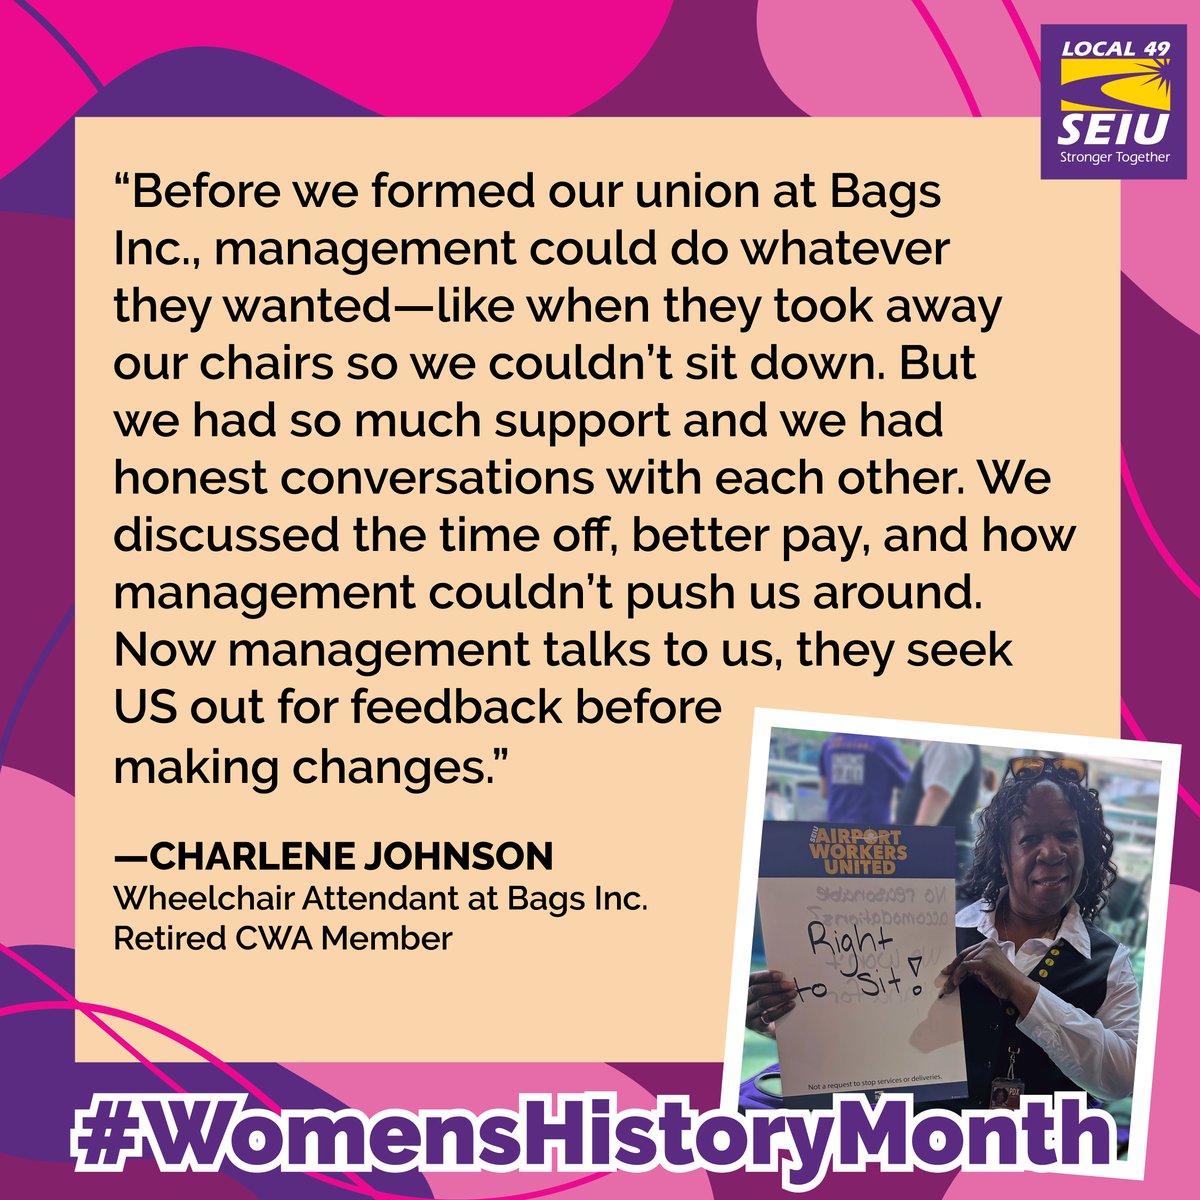 Charlene is a powerhouse for change at PDX. She & her coworkers achieved remarkable 2023 victories such as Bags Inc joining our union, regaining the right to sit during breaks after management took away their chairs, & securing prayer spaces for all! #WomensHistoryMonth